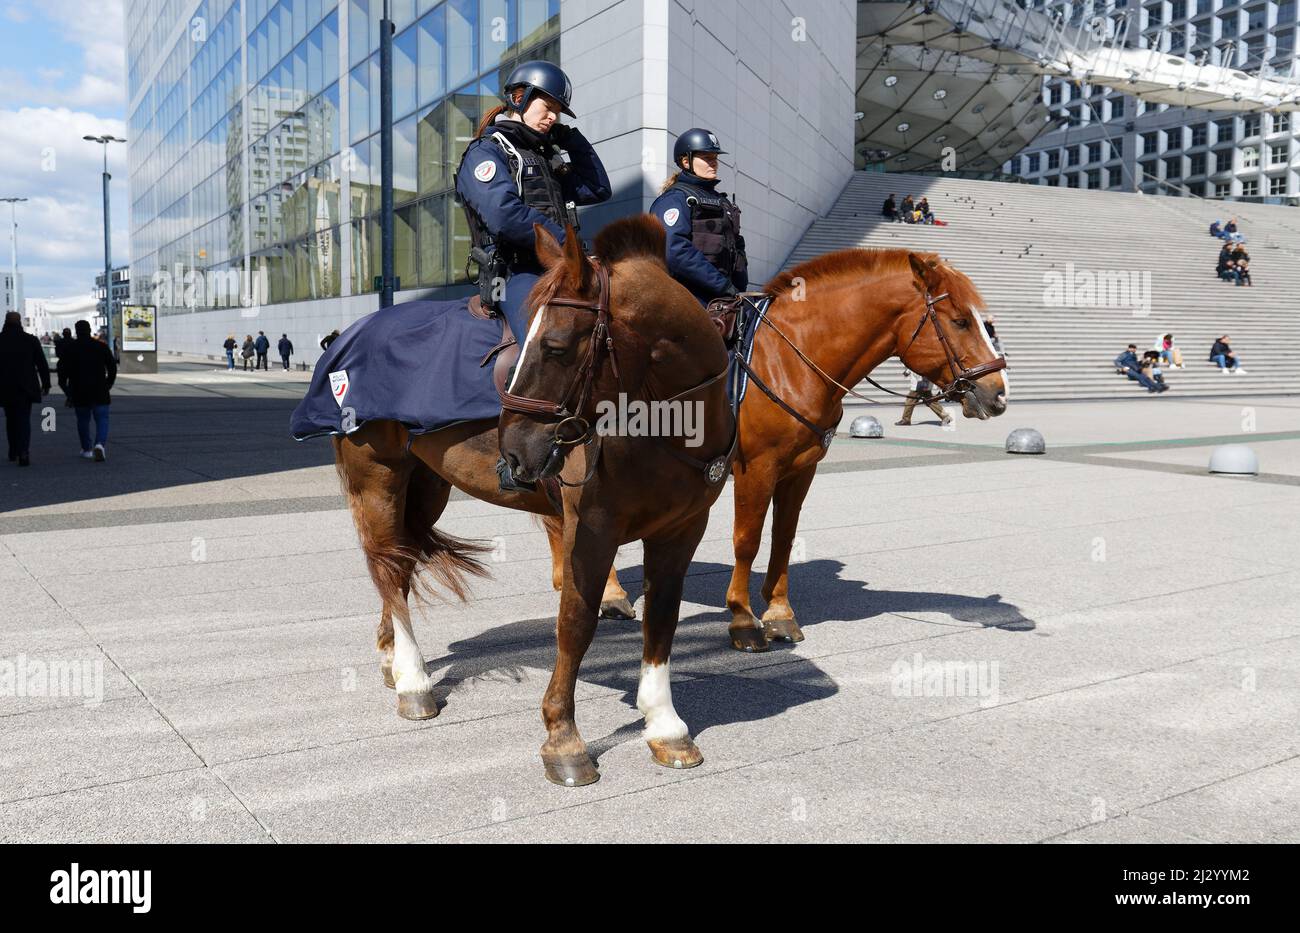 Two mounted police officers on horses are patrolling through the walkway of the seine river in downtown of Paris Stock Photo